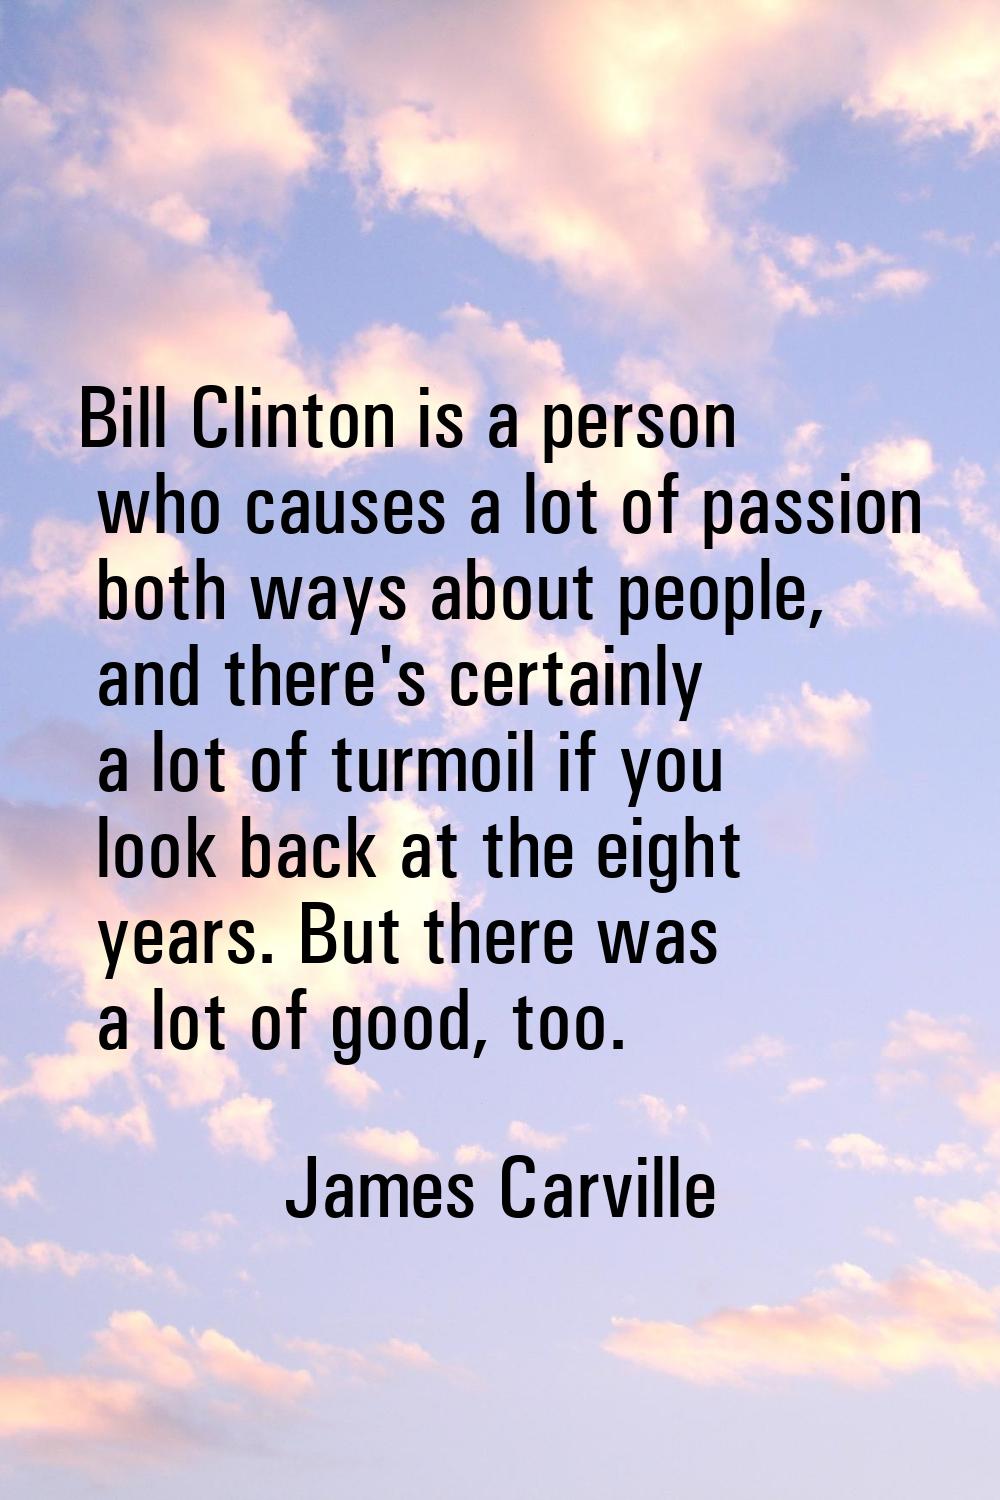 Bill Clinton is a person who causes a lot of passion both ways about people, and there's certainly 